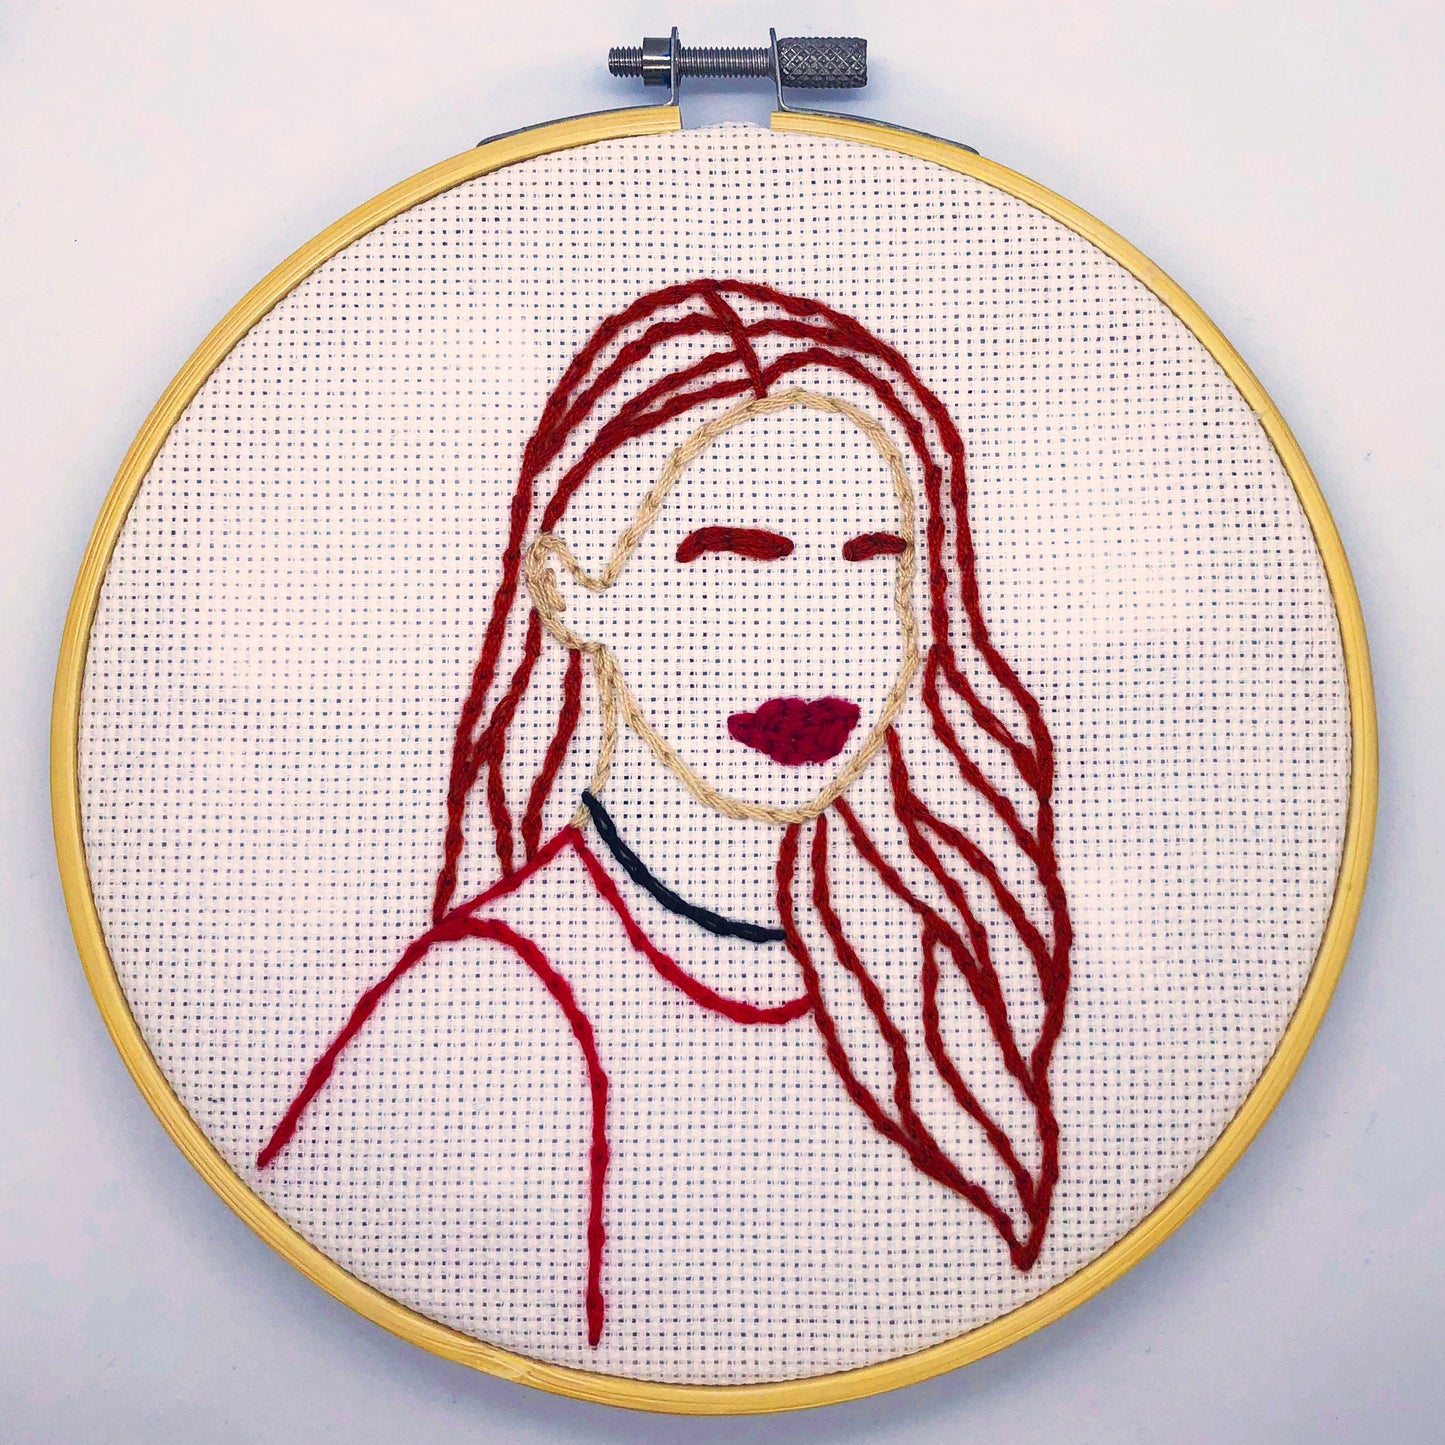 Riverdale embroidery